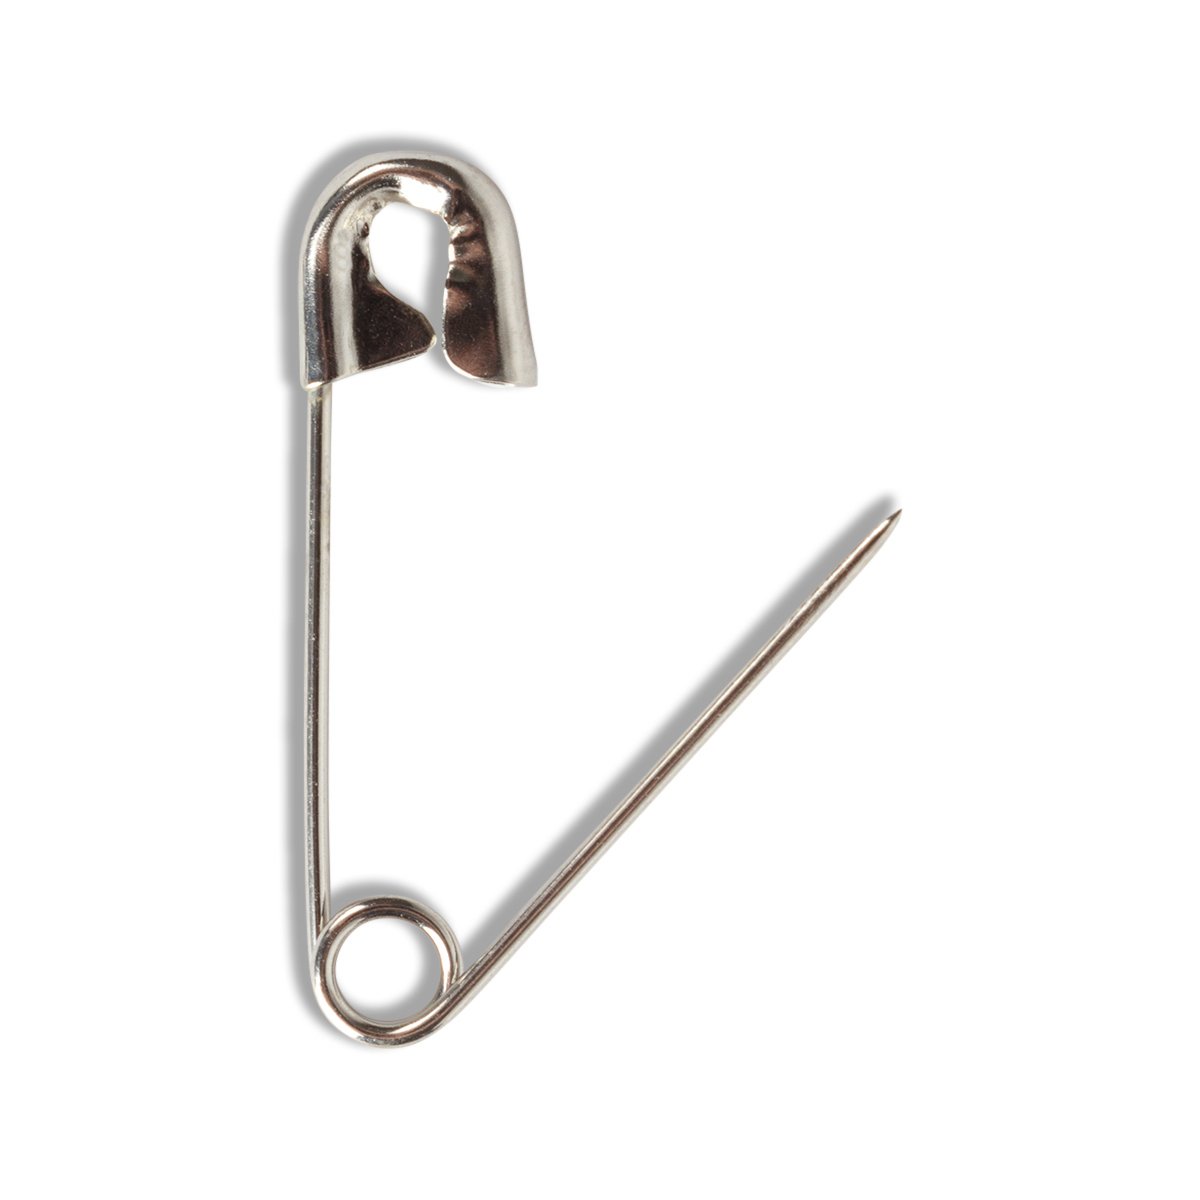 Closed Brass/Quilter Safety Pins - #3 - 2 - 20/Box - WAWAK Sewing